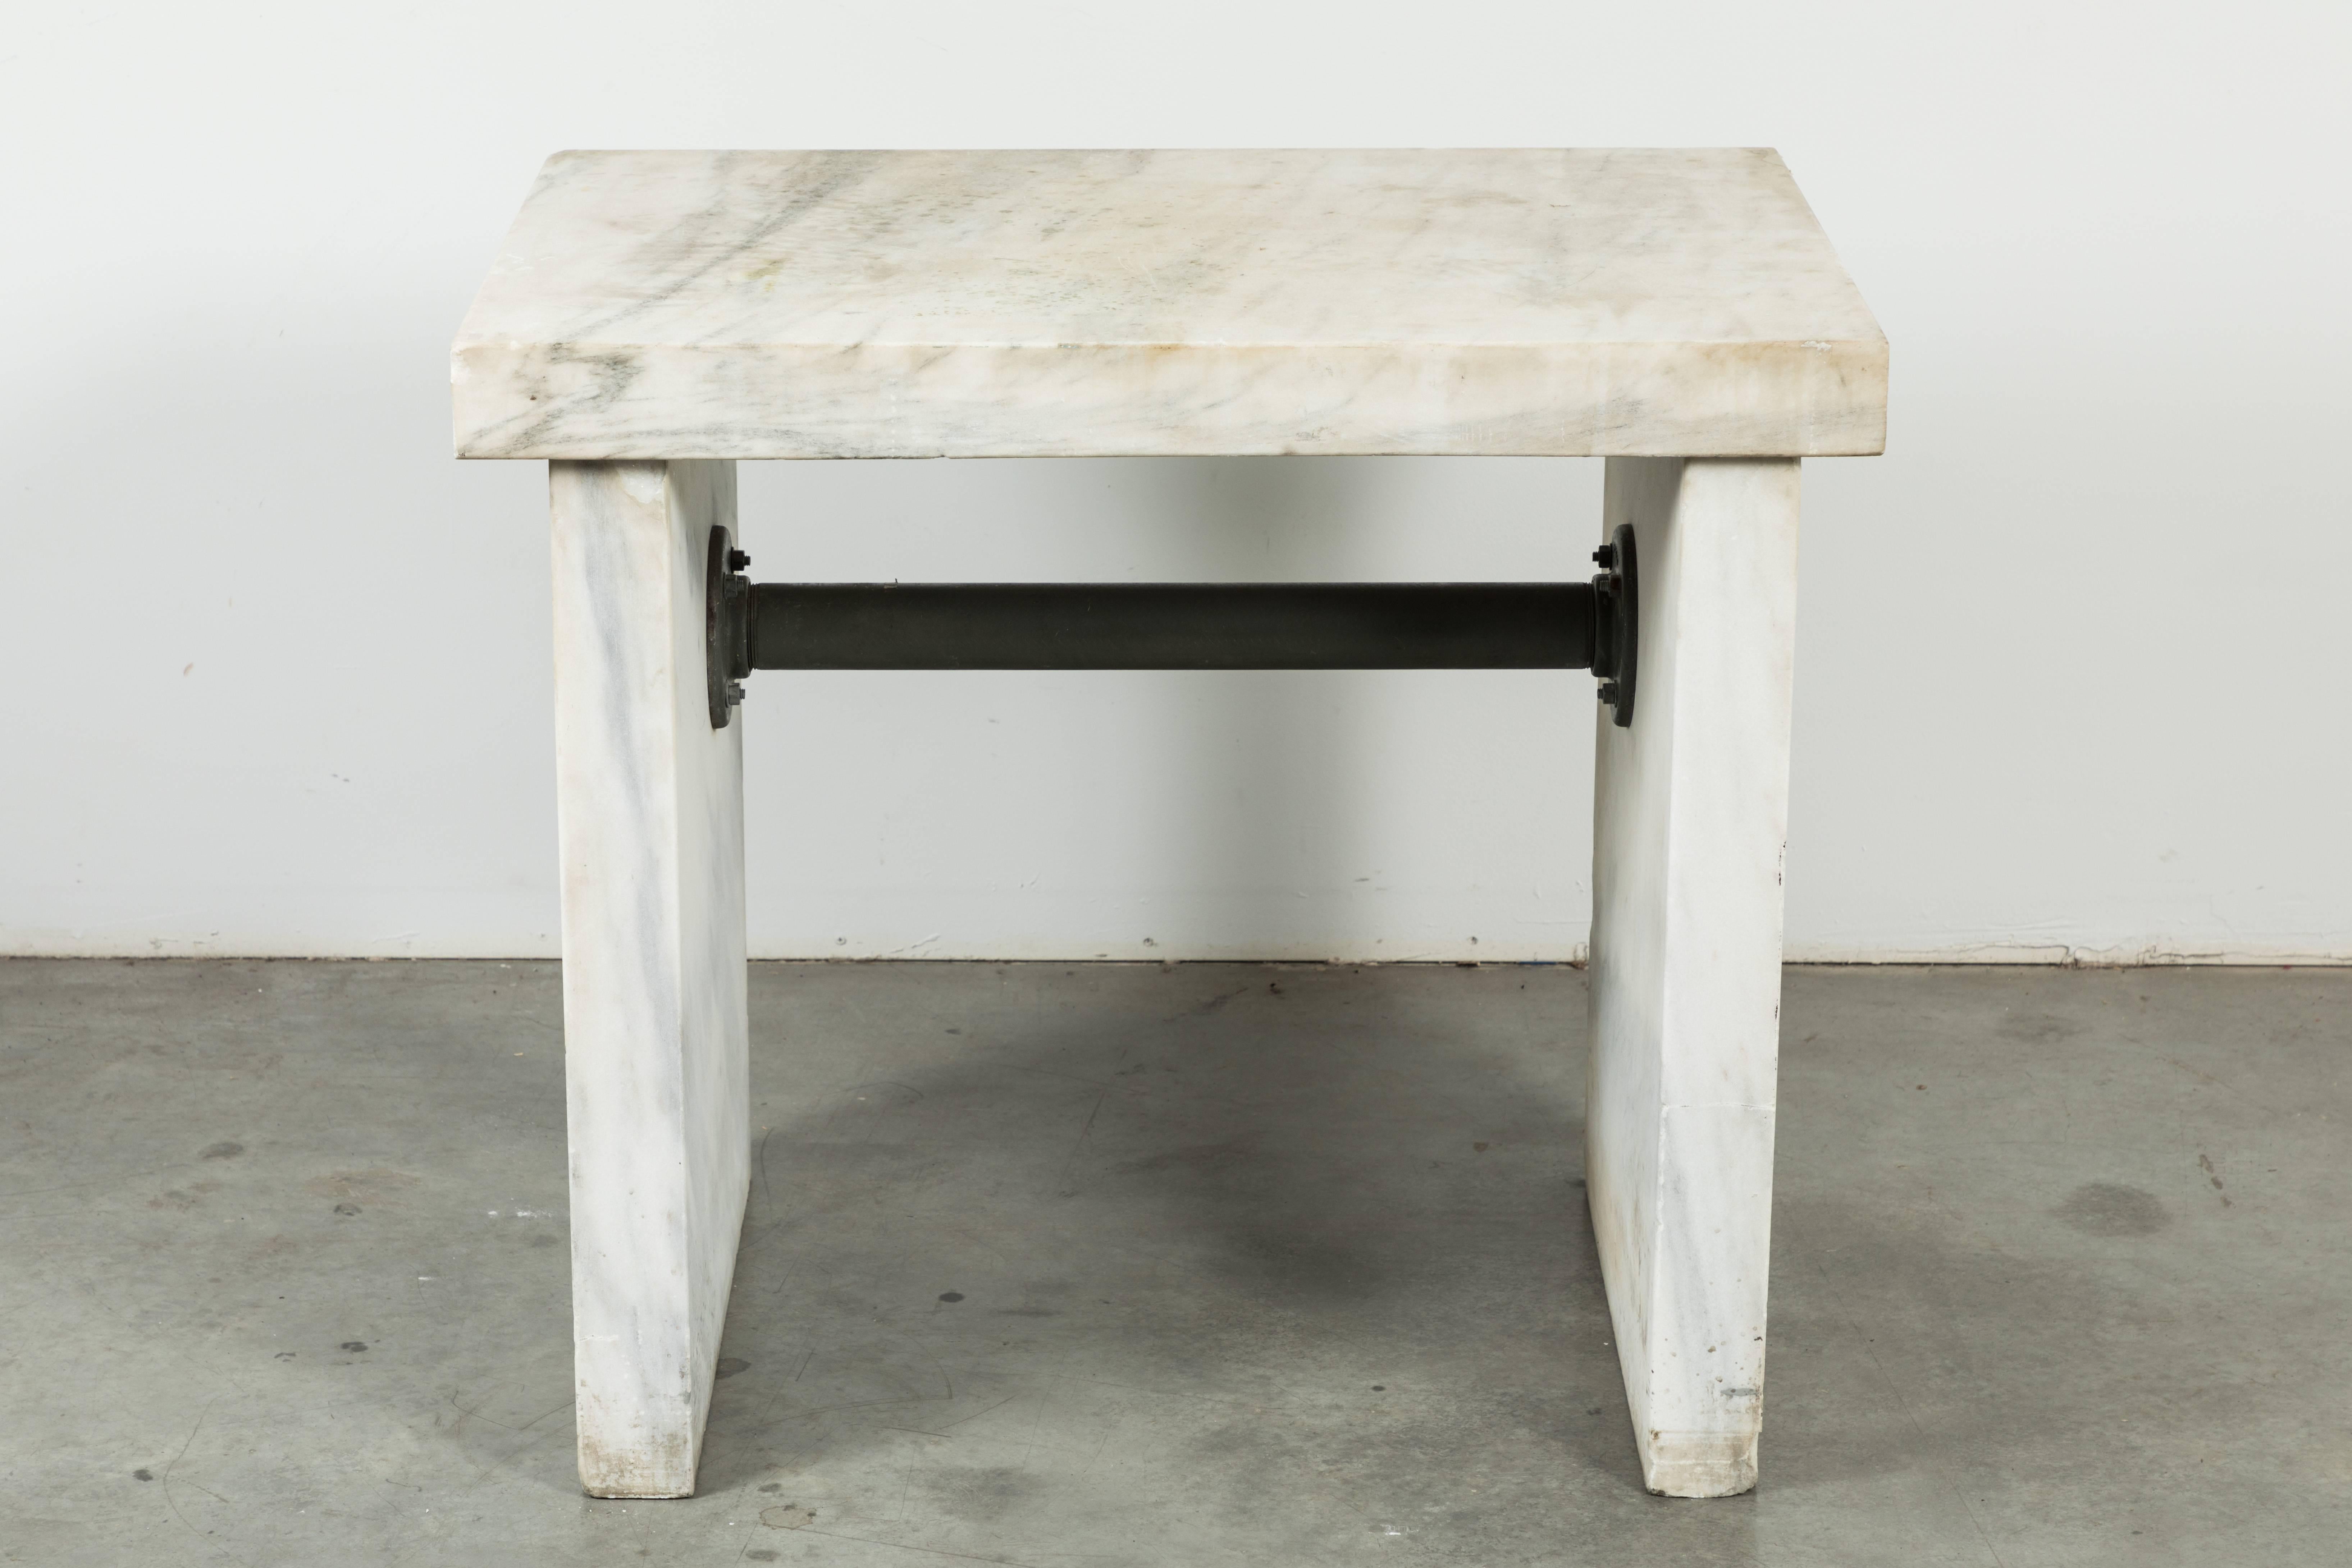 Chunky marble slab table found in the Midwest. Most likely an industrial factory table. Uses could have been for candy making, an industrial bakery or lab. Awesome honed marble with the perfect amount of patina and wear. Functional kitchen work